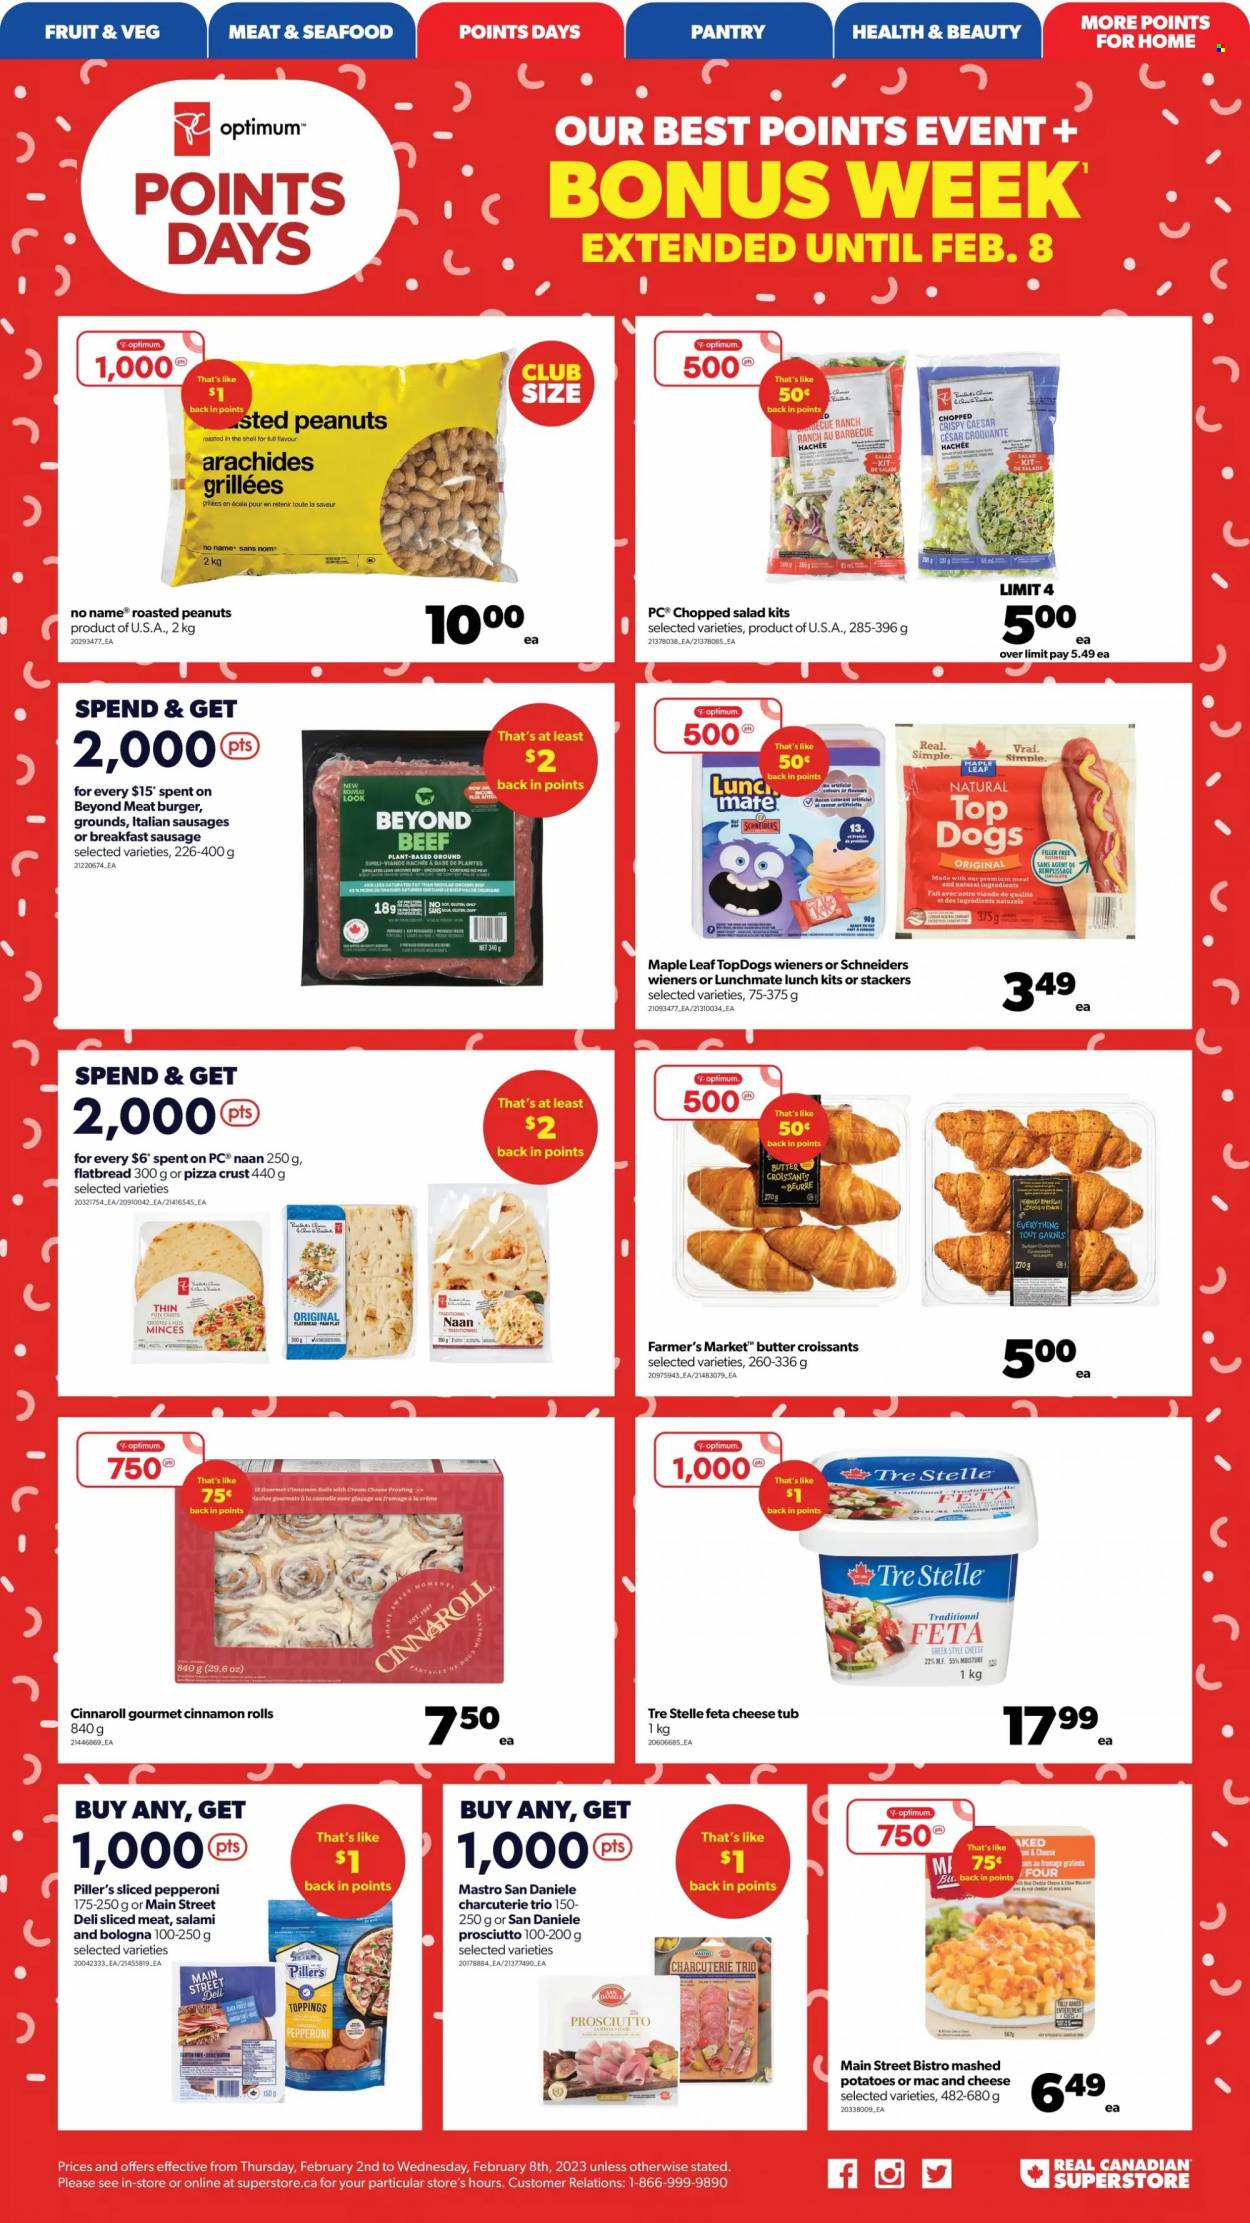 thumbnail - Real Canadian Superstore Flyer - February 02, 2023 - February 08, 2023 - Sales products - flatbread, cinnamon roll, salad, chopped salad, seafood, No Name, macaroni & cheese, mashed potatoes, pizza, hamburger, salami, prosciutto, bologna sausage, sausage, pepperoni, feta, roasted peanuts, peanuts, Optimum, Dell. Page 2.